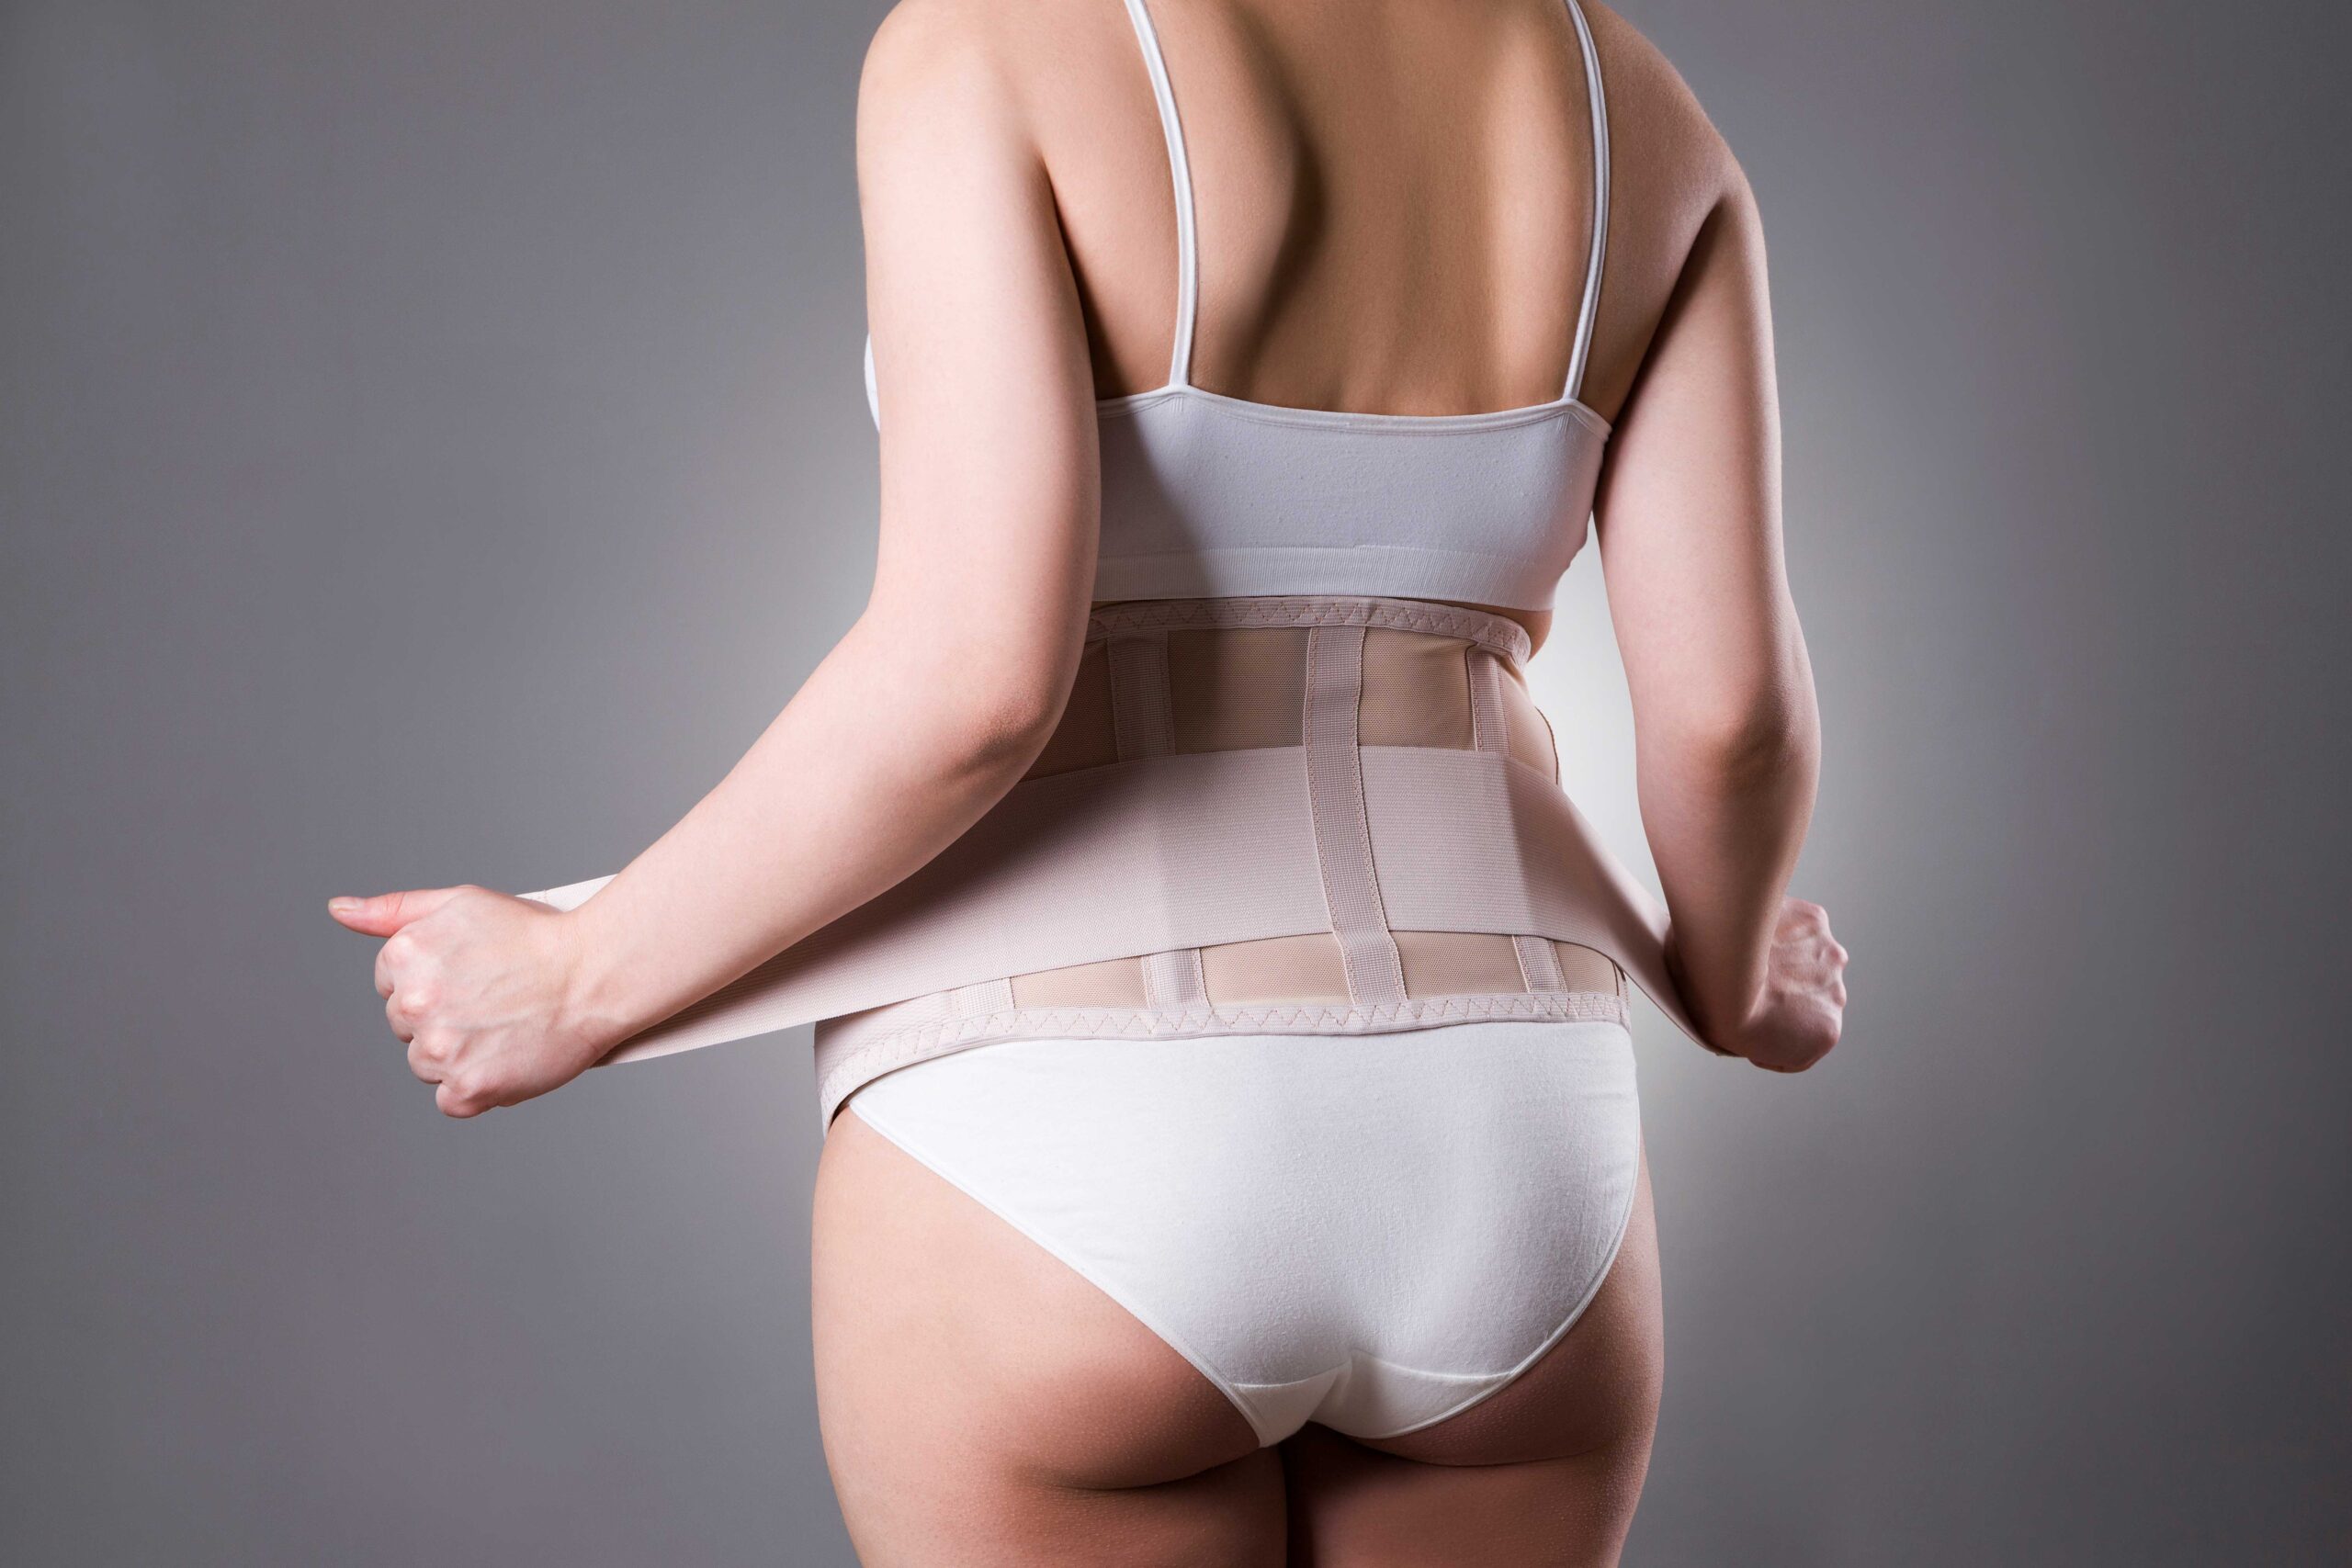 Is the Tummy Tuck Belt a Scam?